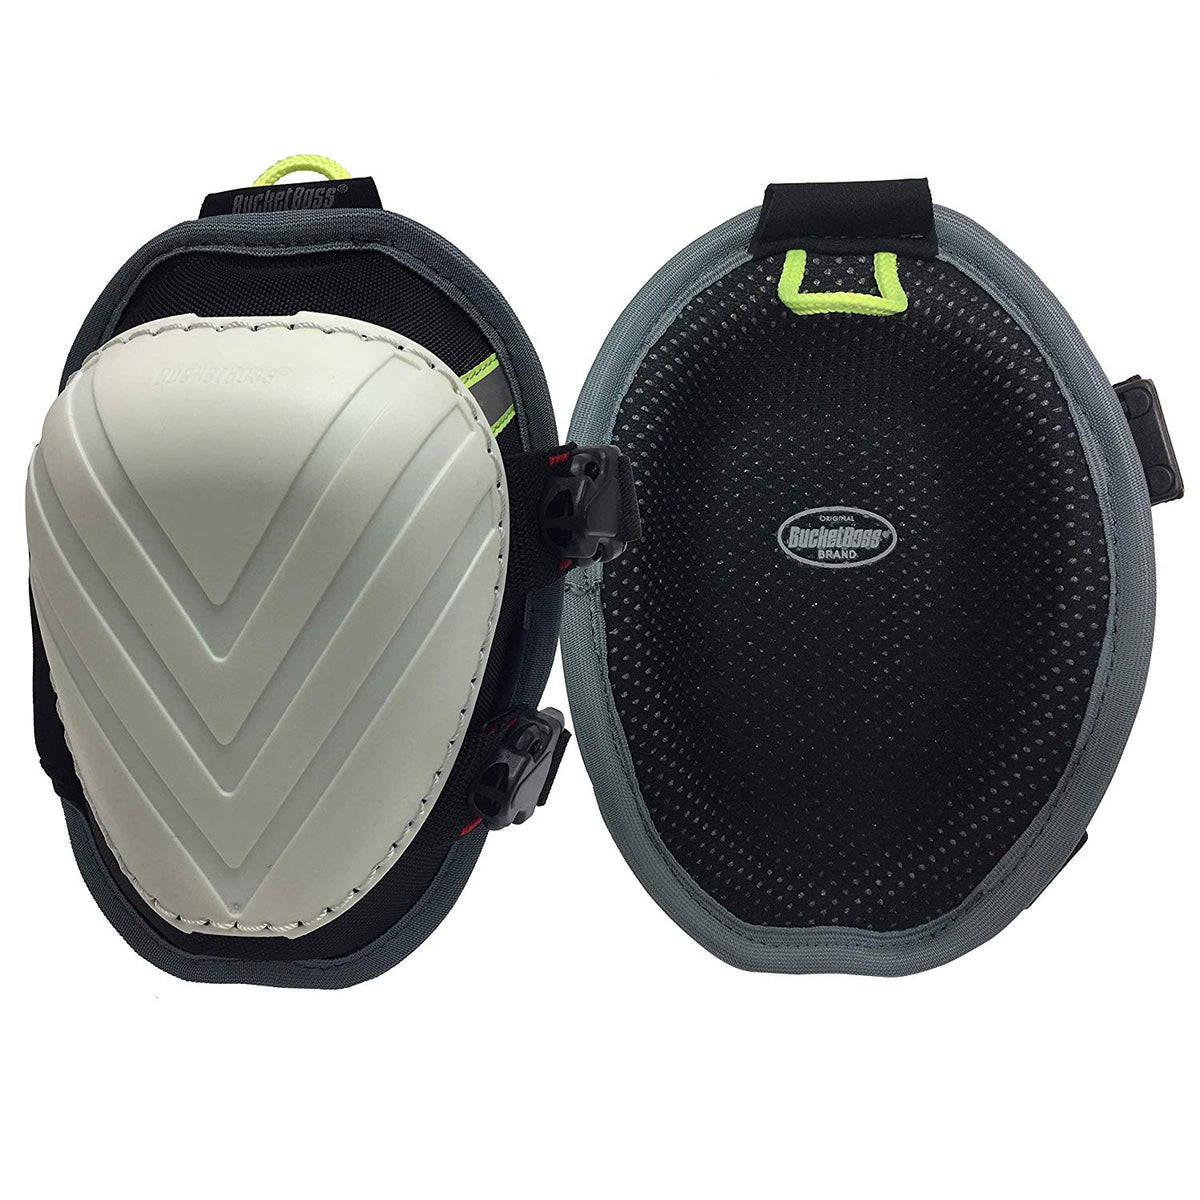 Bucket Boss FX1 Molded Swivel Knee Pad with Elastic Straps & Buckle Closure